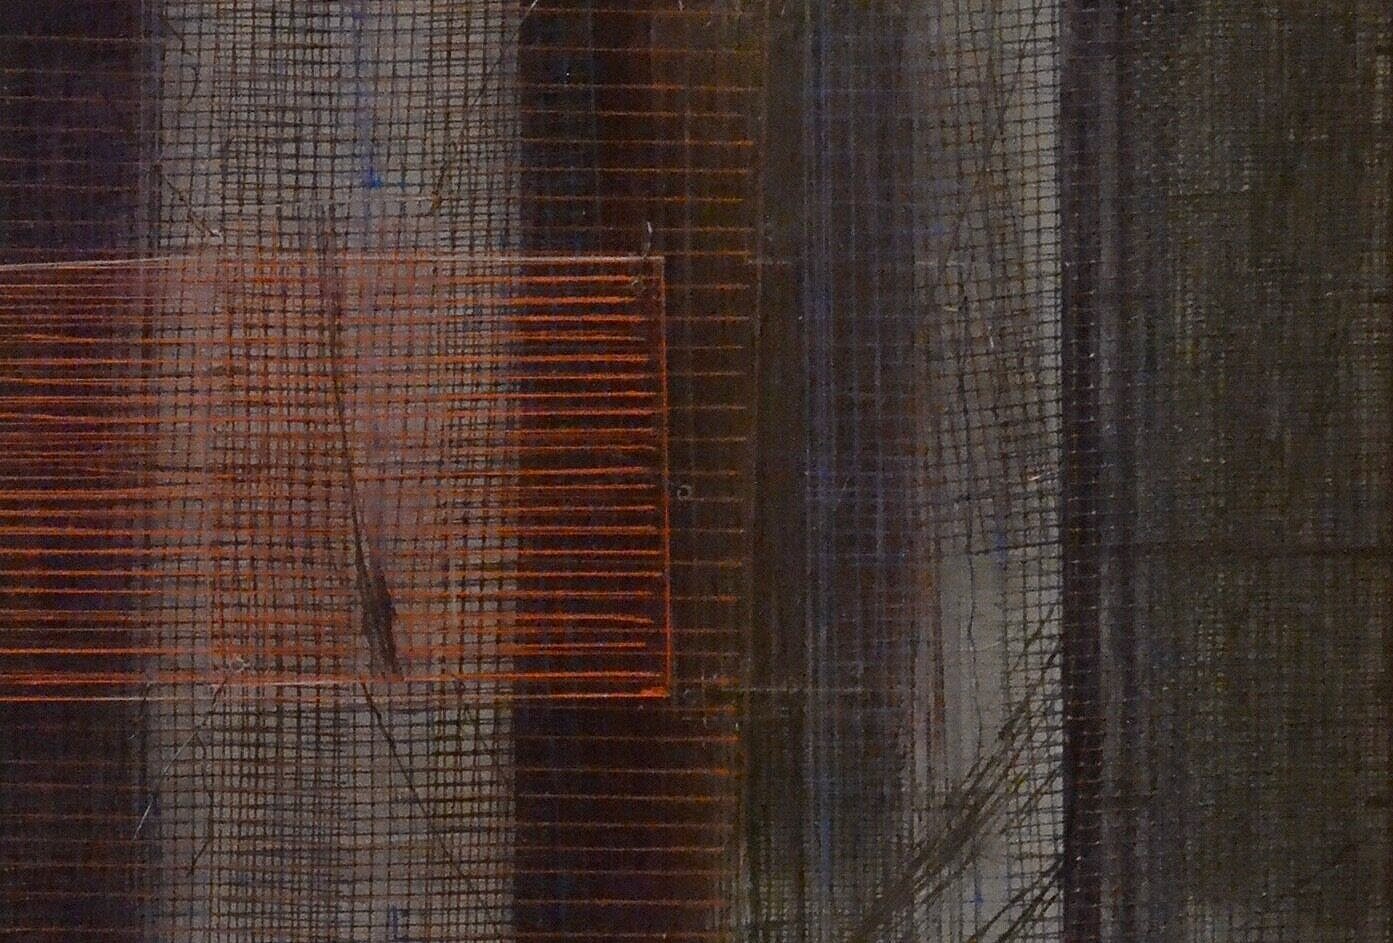 Detail from Untitled, February 2021